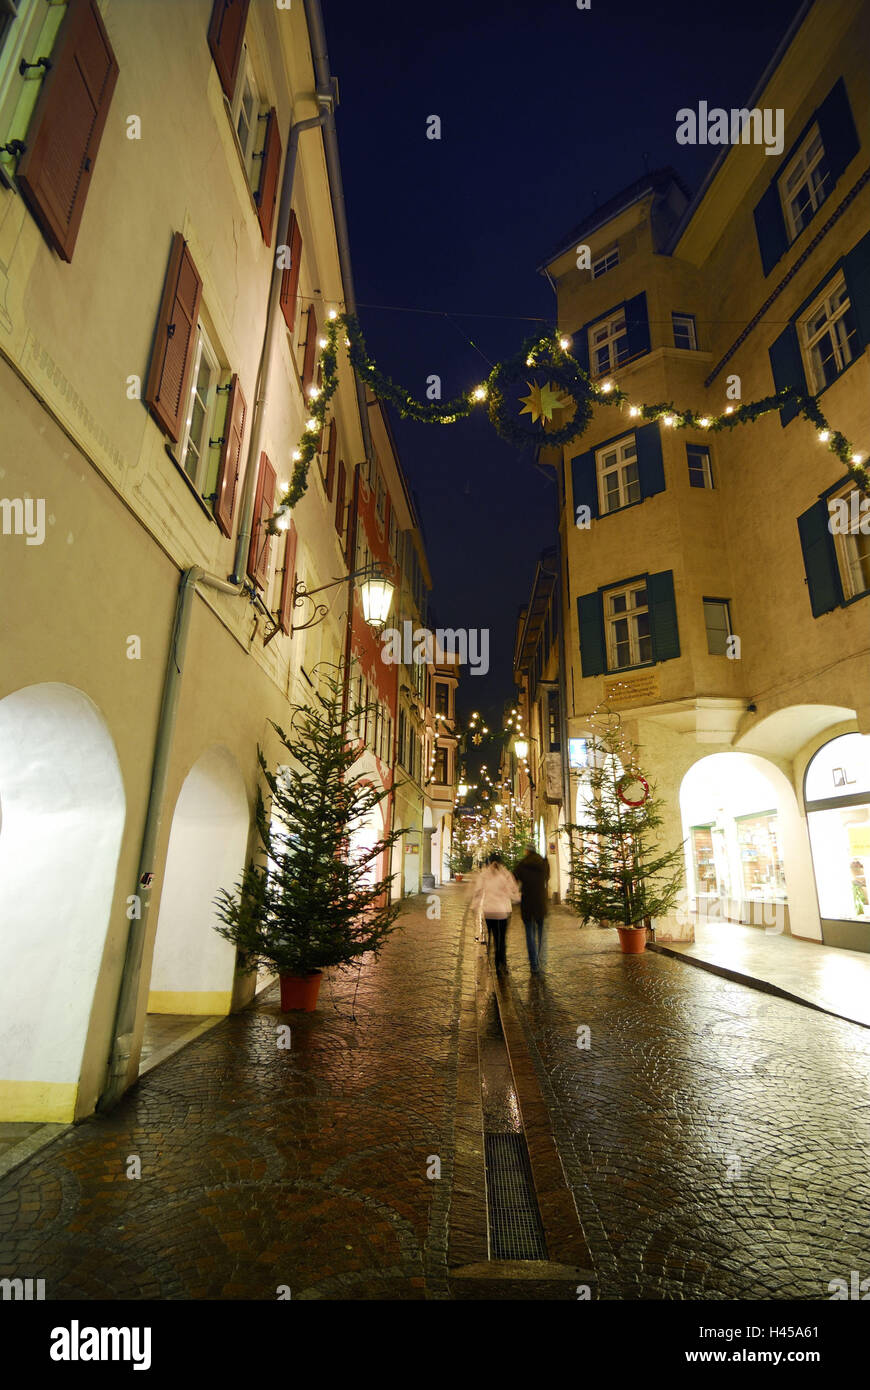 Italy, South Tyrol, Merano, bower lane, for Christmas, passers-by, evening, town, town view, pedestrian area, lane, Advent, yule tide, Christmas, Advent decoration, decoration, Christmas decoration, Christmas trees, shops, shops, shop-windows, houses, arcades, illuminateds, cobblestones, person, couple, back view, stroll, winter, lanterns, night, Stock Photo